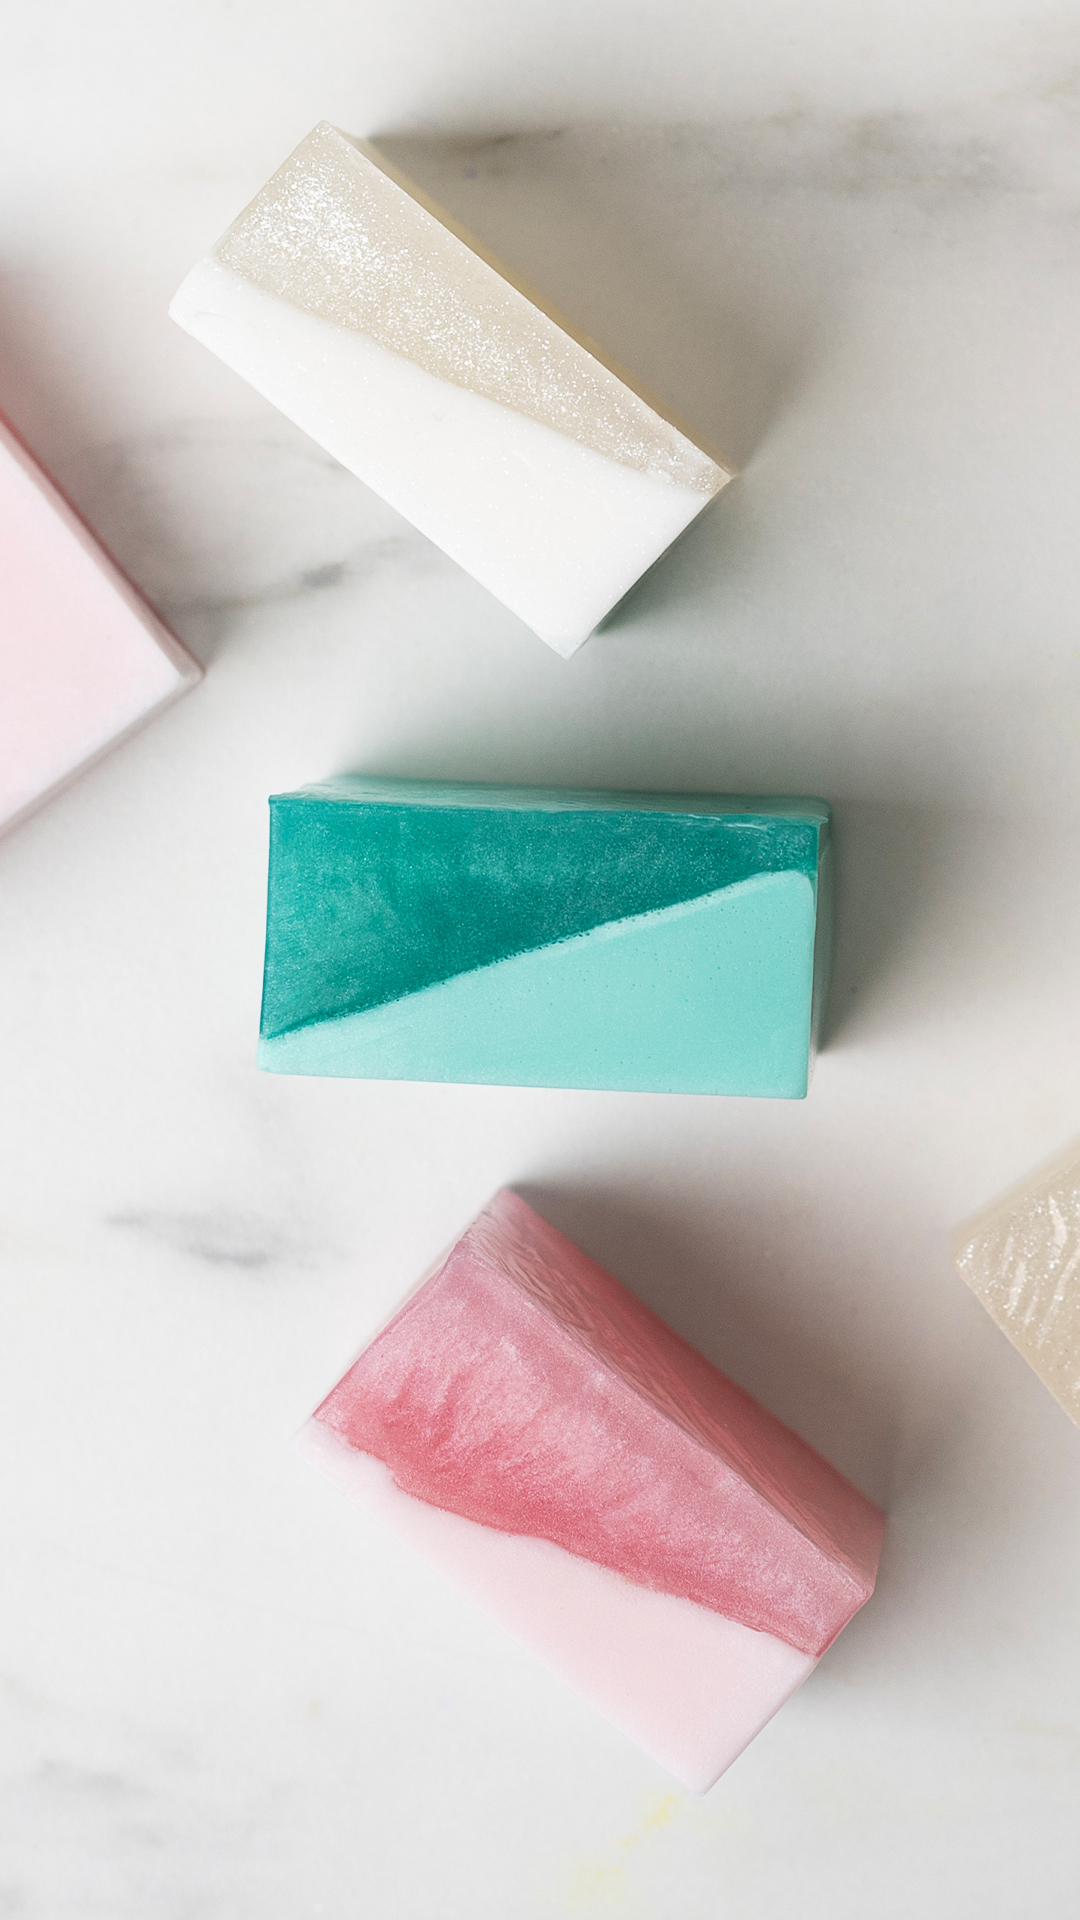 Tilted layer soap bars with mica.